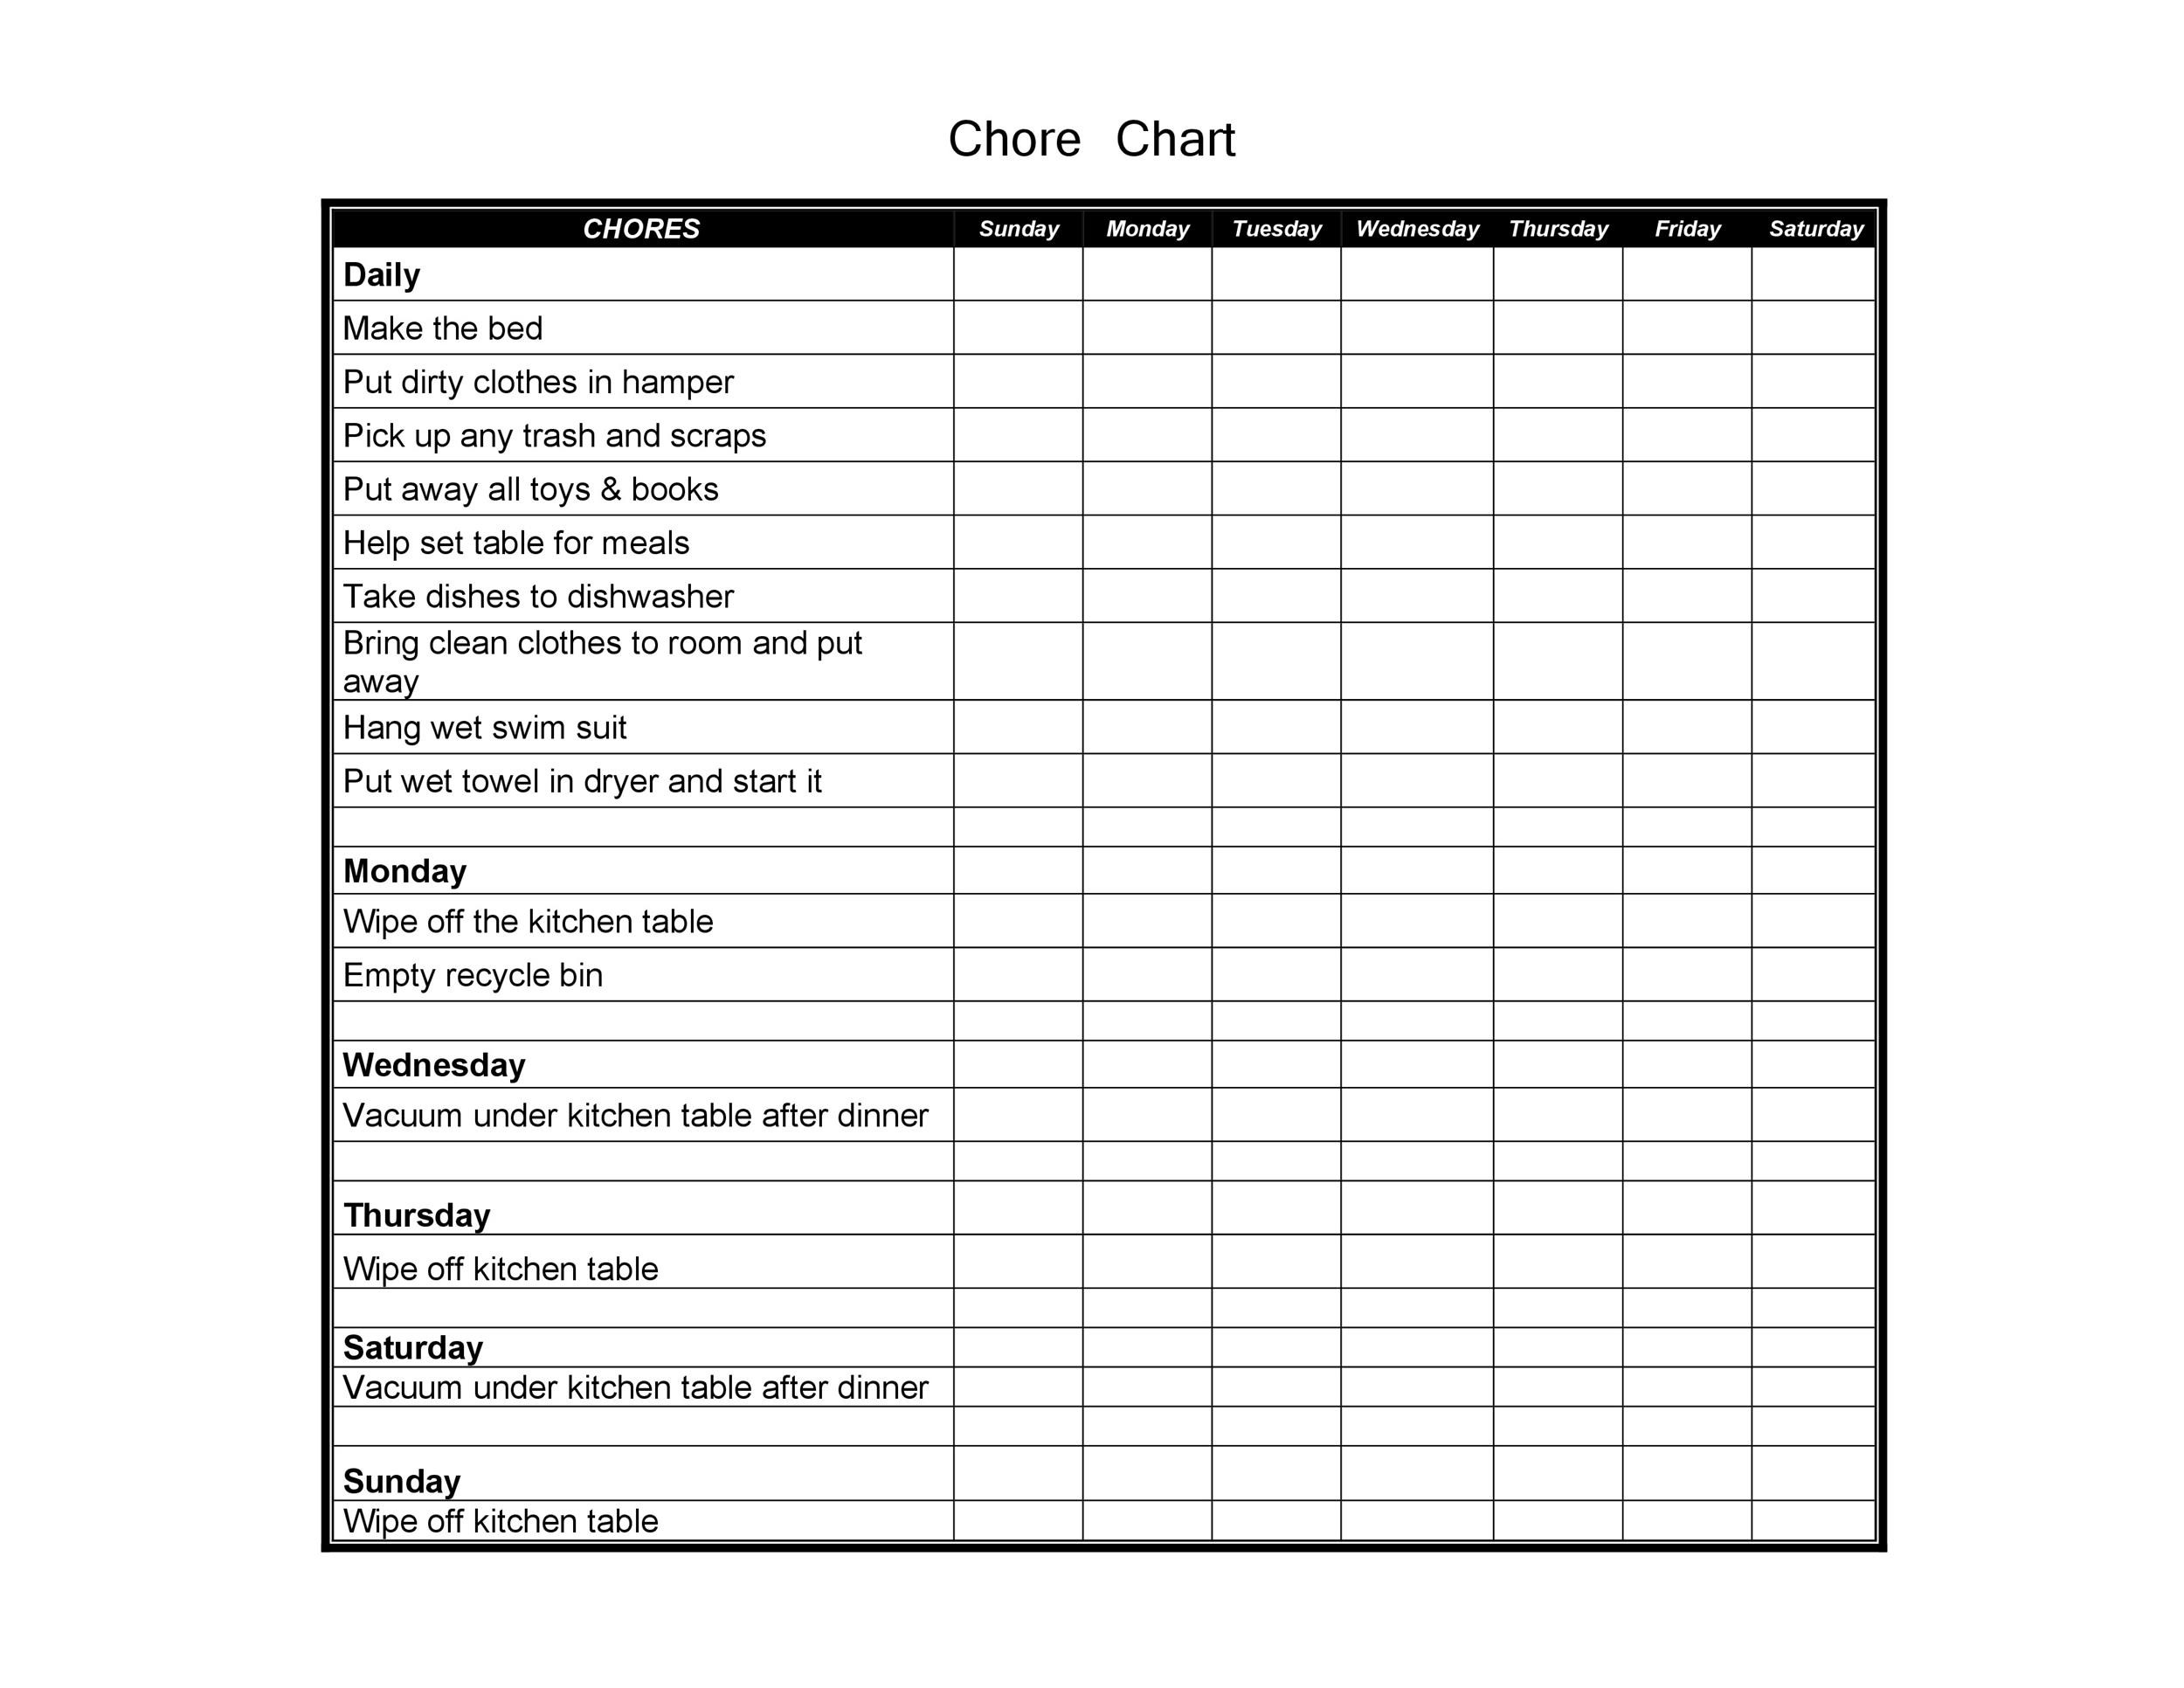 Daily Task Chart